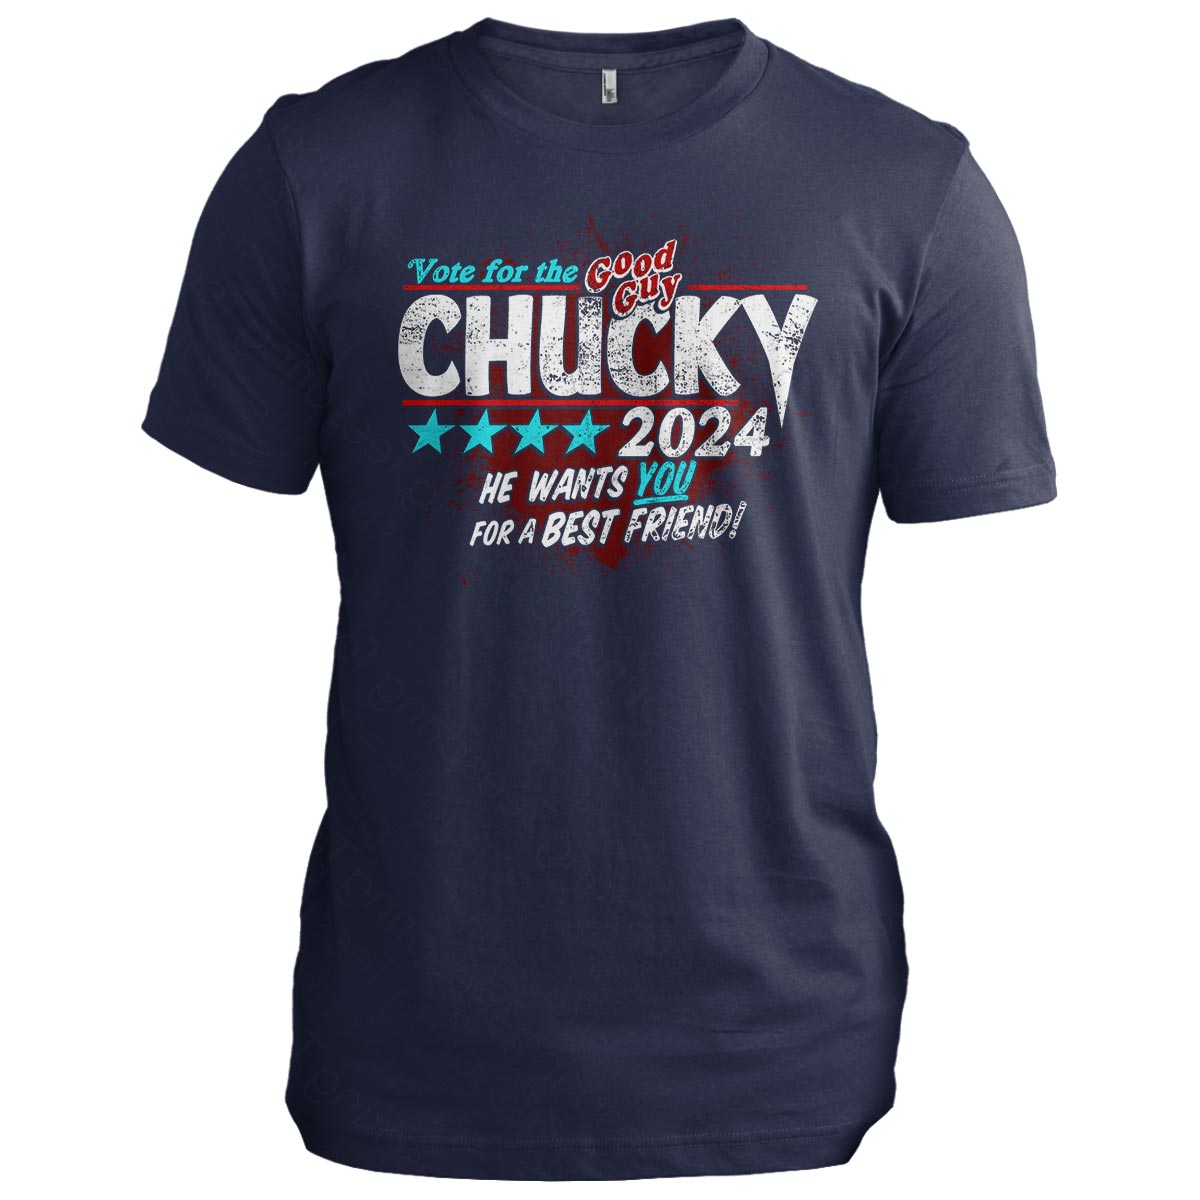 Chucky 2024: Vote for the Good Guy